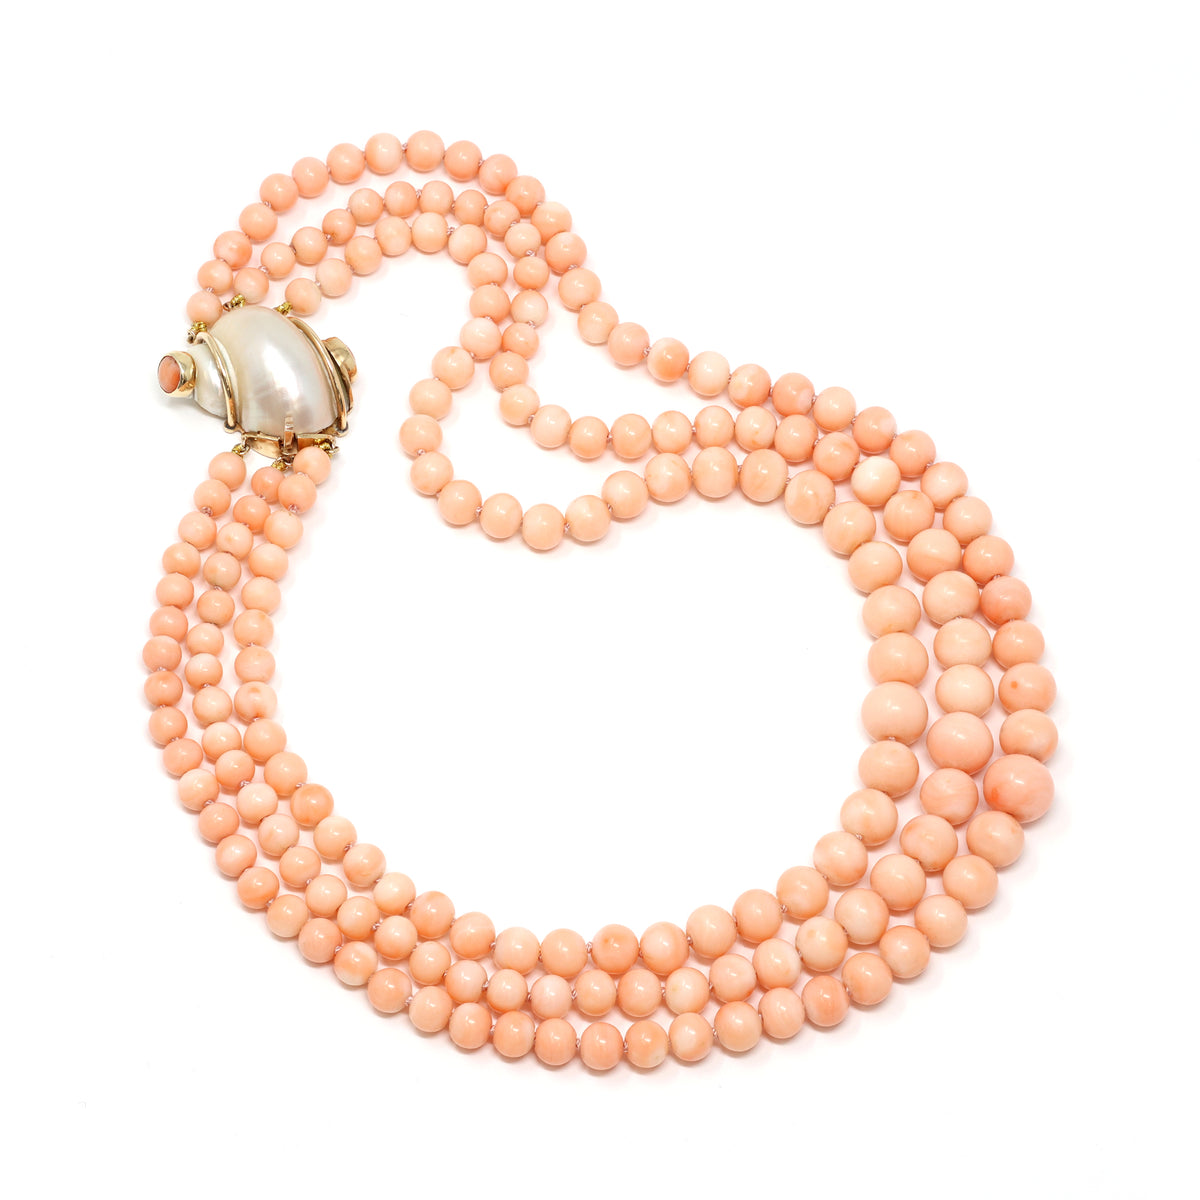 antique-1960s-angel-skin-coral-triple-strand-necklace-with-14-karat-yellow-gold-and-shell-clasp-top-view-2000x2000